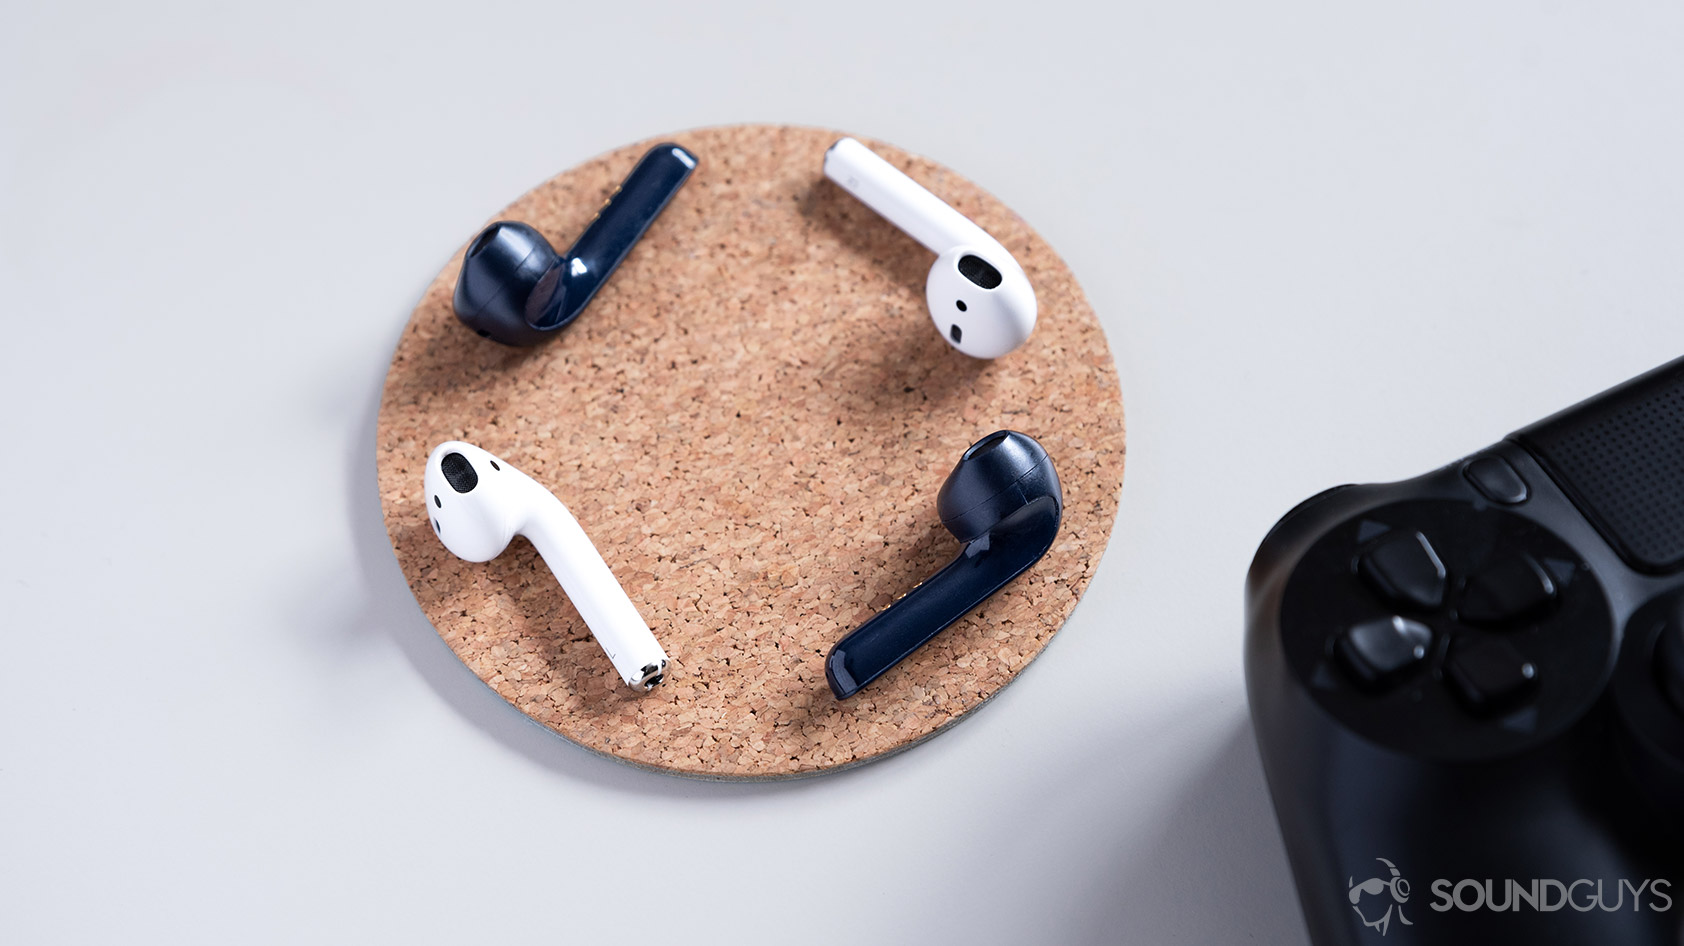 A picture of the Mobvoi TicPods 2 Pro true wireless earbuds compared to the Apple AirPods on a cork coaster.